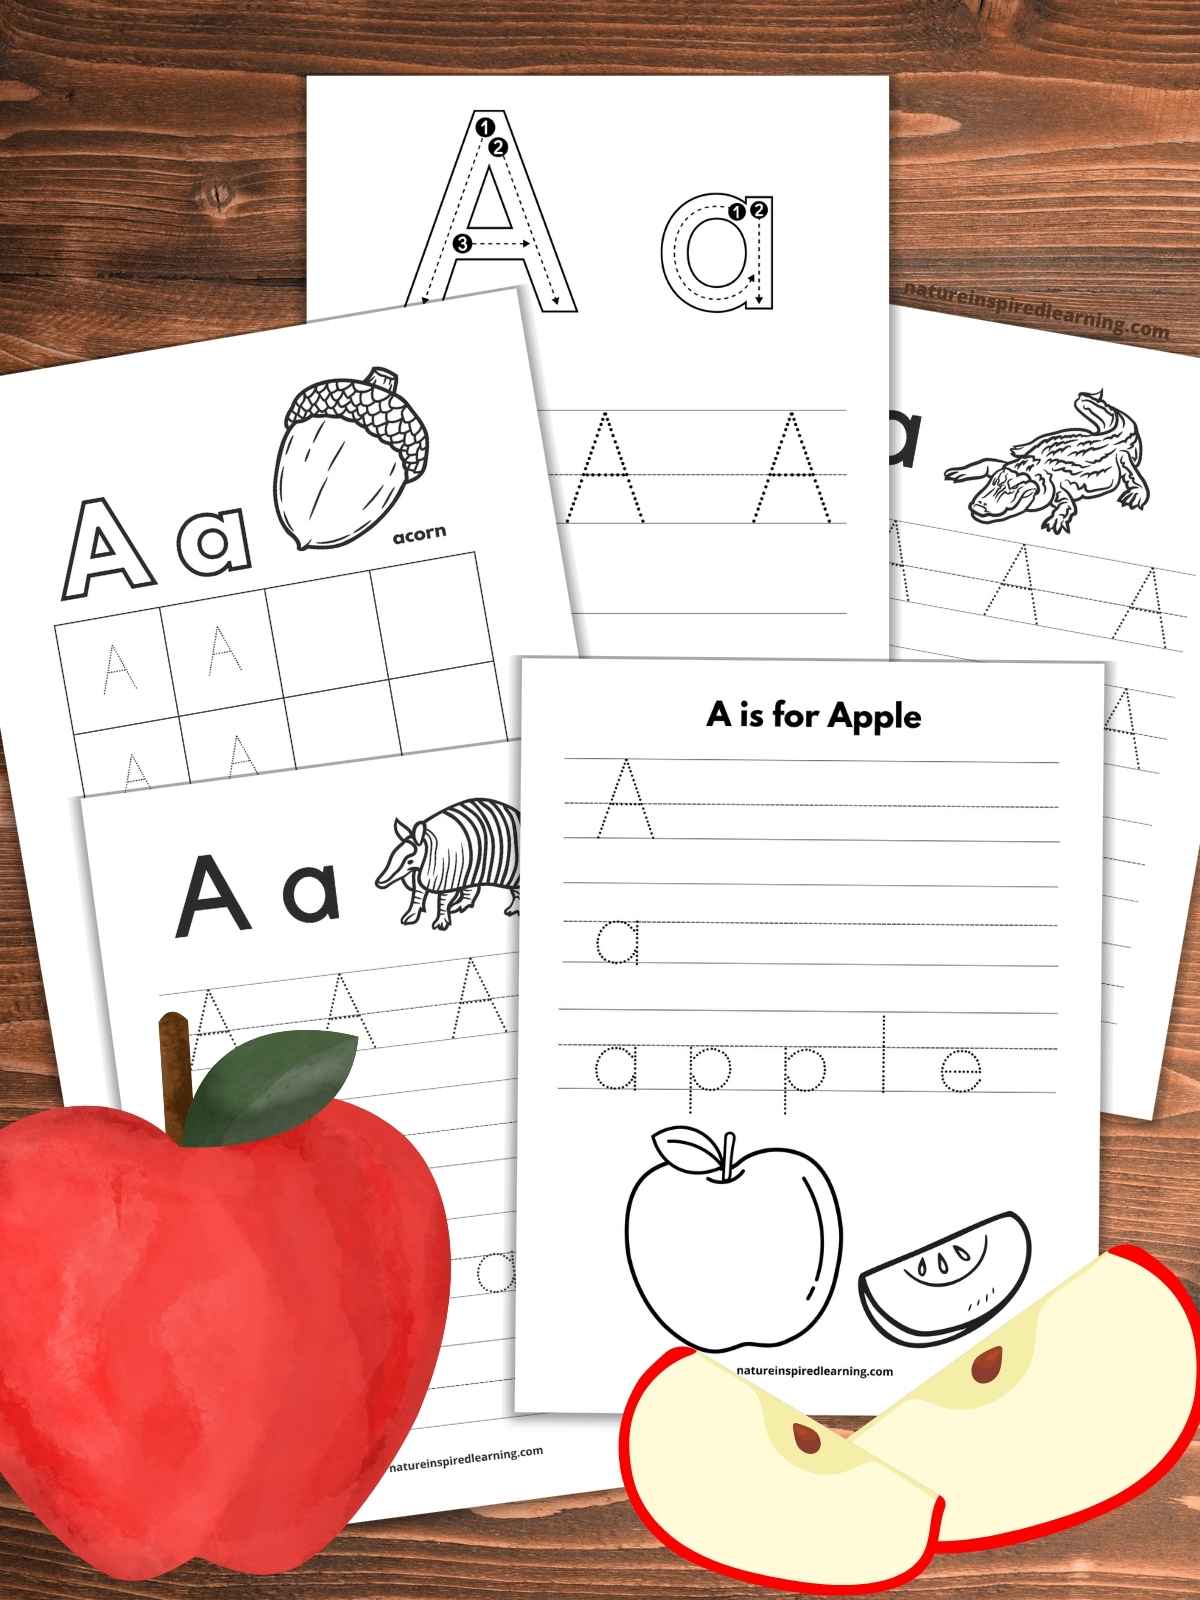 Tracing Letter A worksheets overlapping each other on a wooden background with a large red apple bottom left and two apple slices bottom right